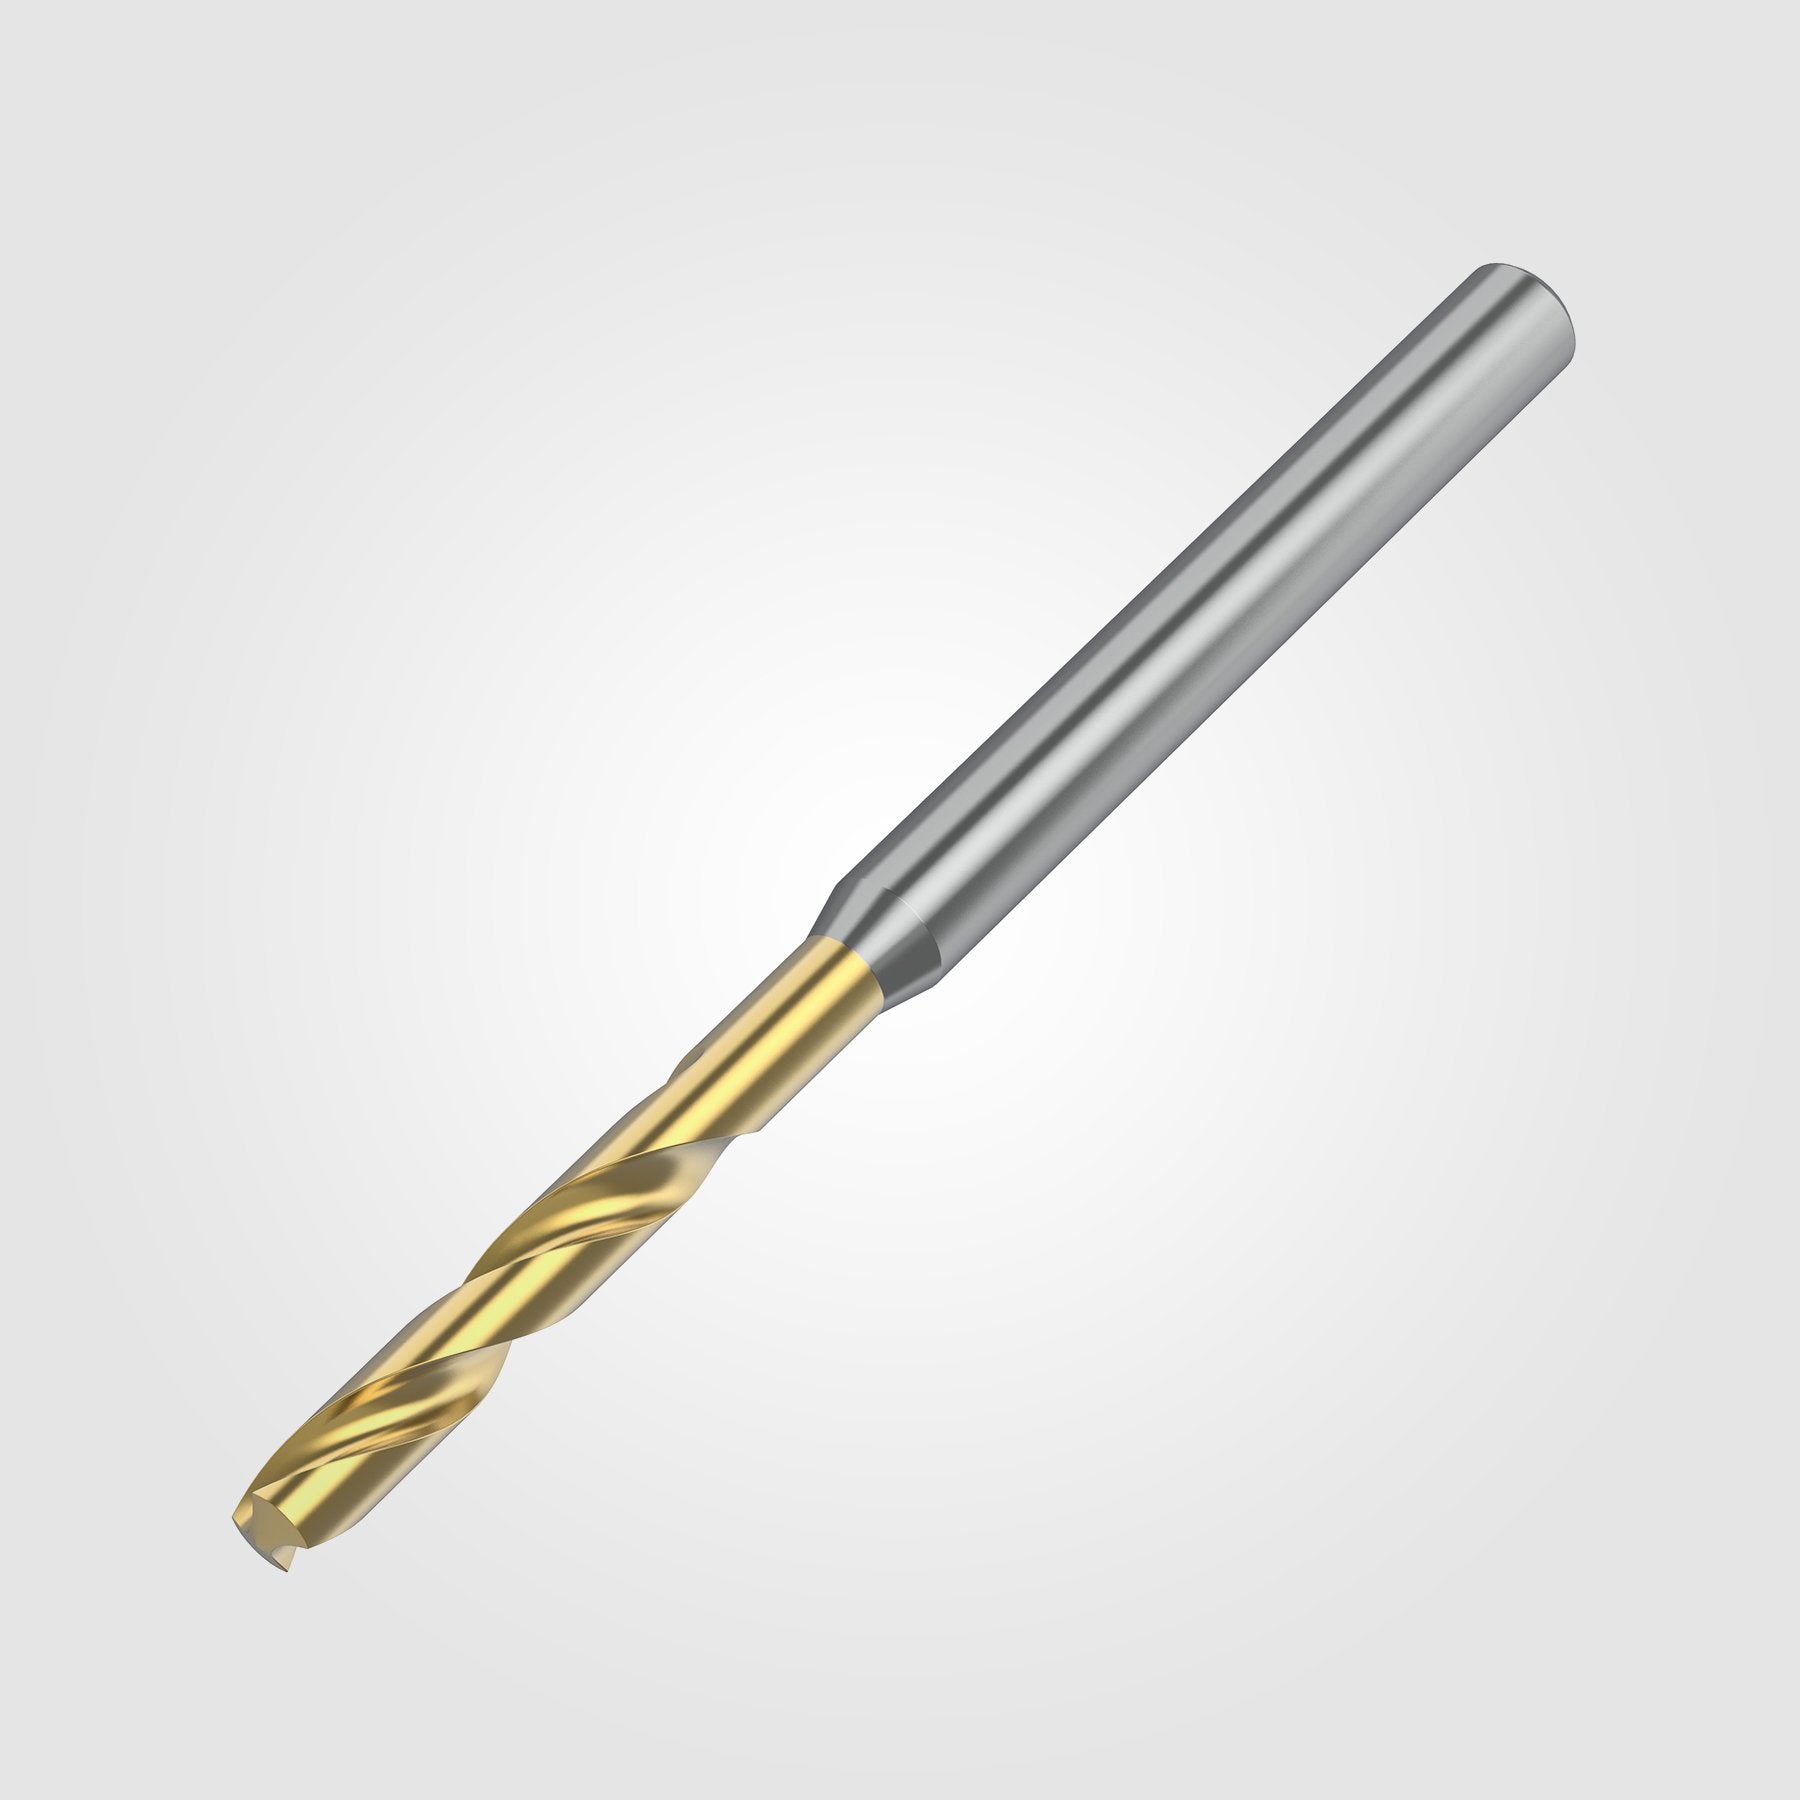 GOdrill (THROUGH COOLANT) | 15.083mm / .5938" / 5xD | SOLID CARBIDE DRILL | 4149351